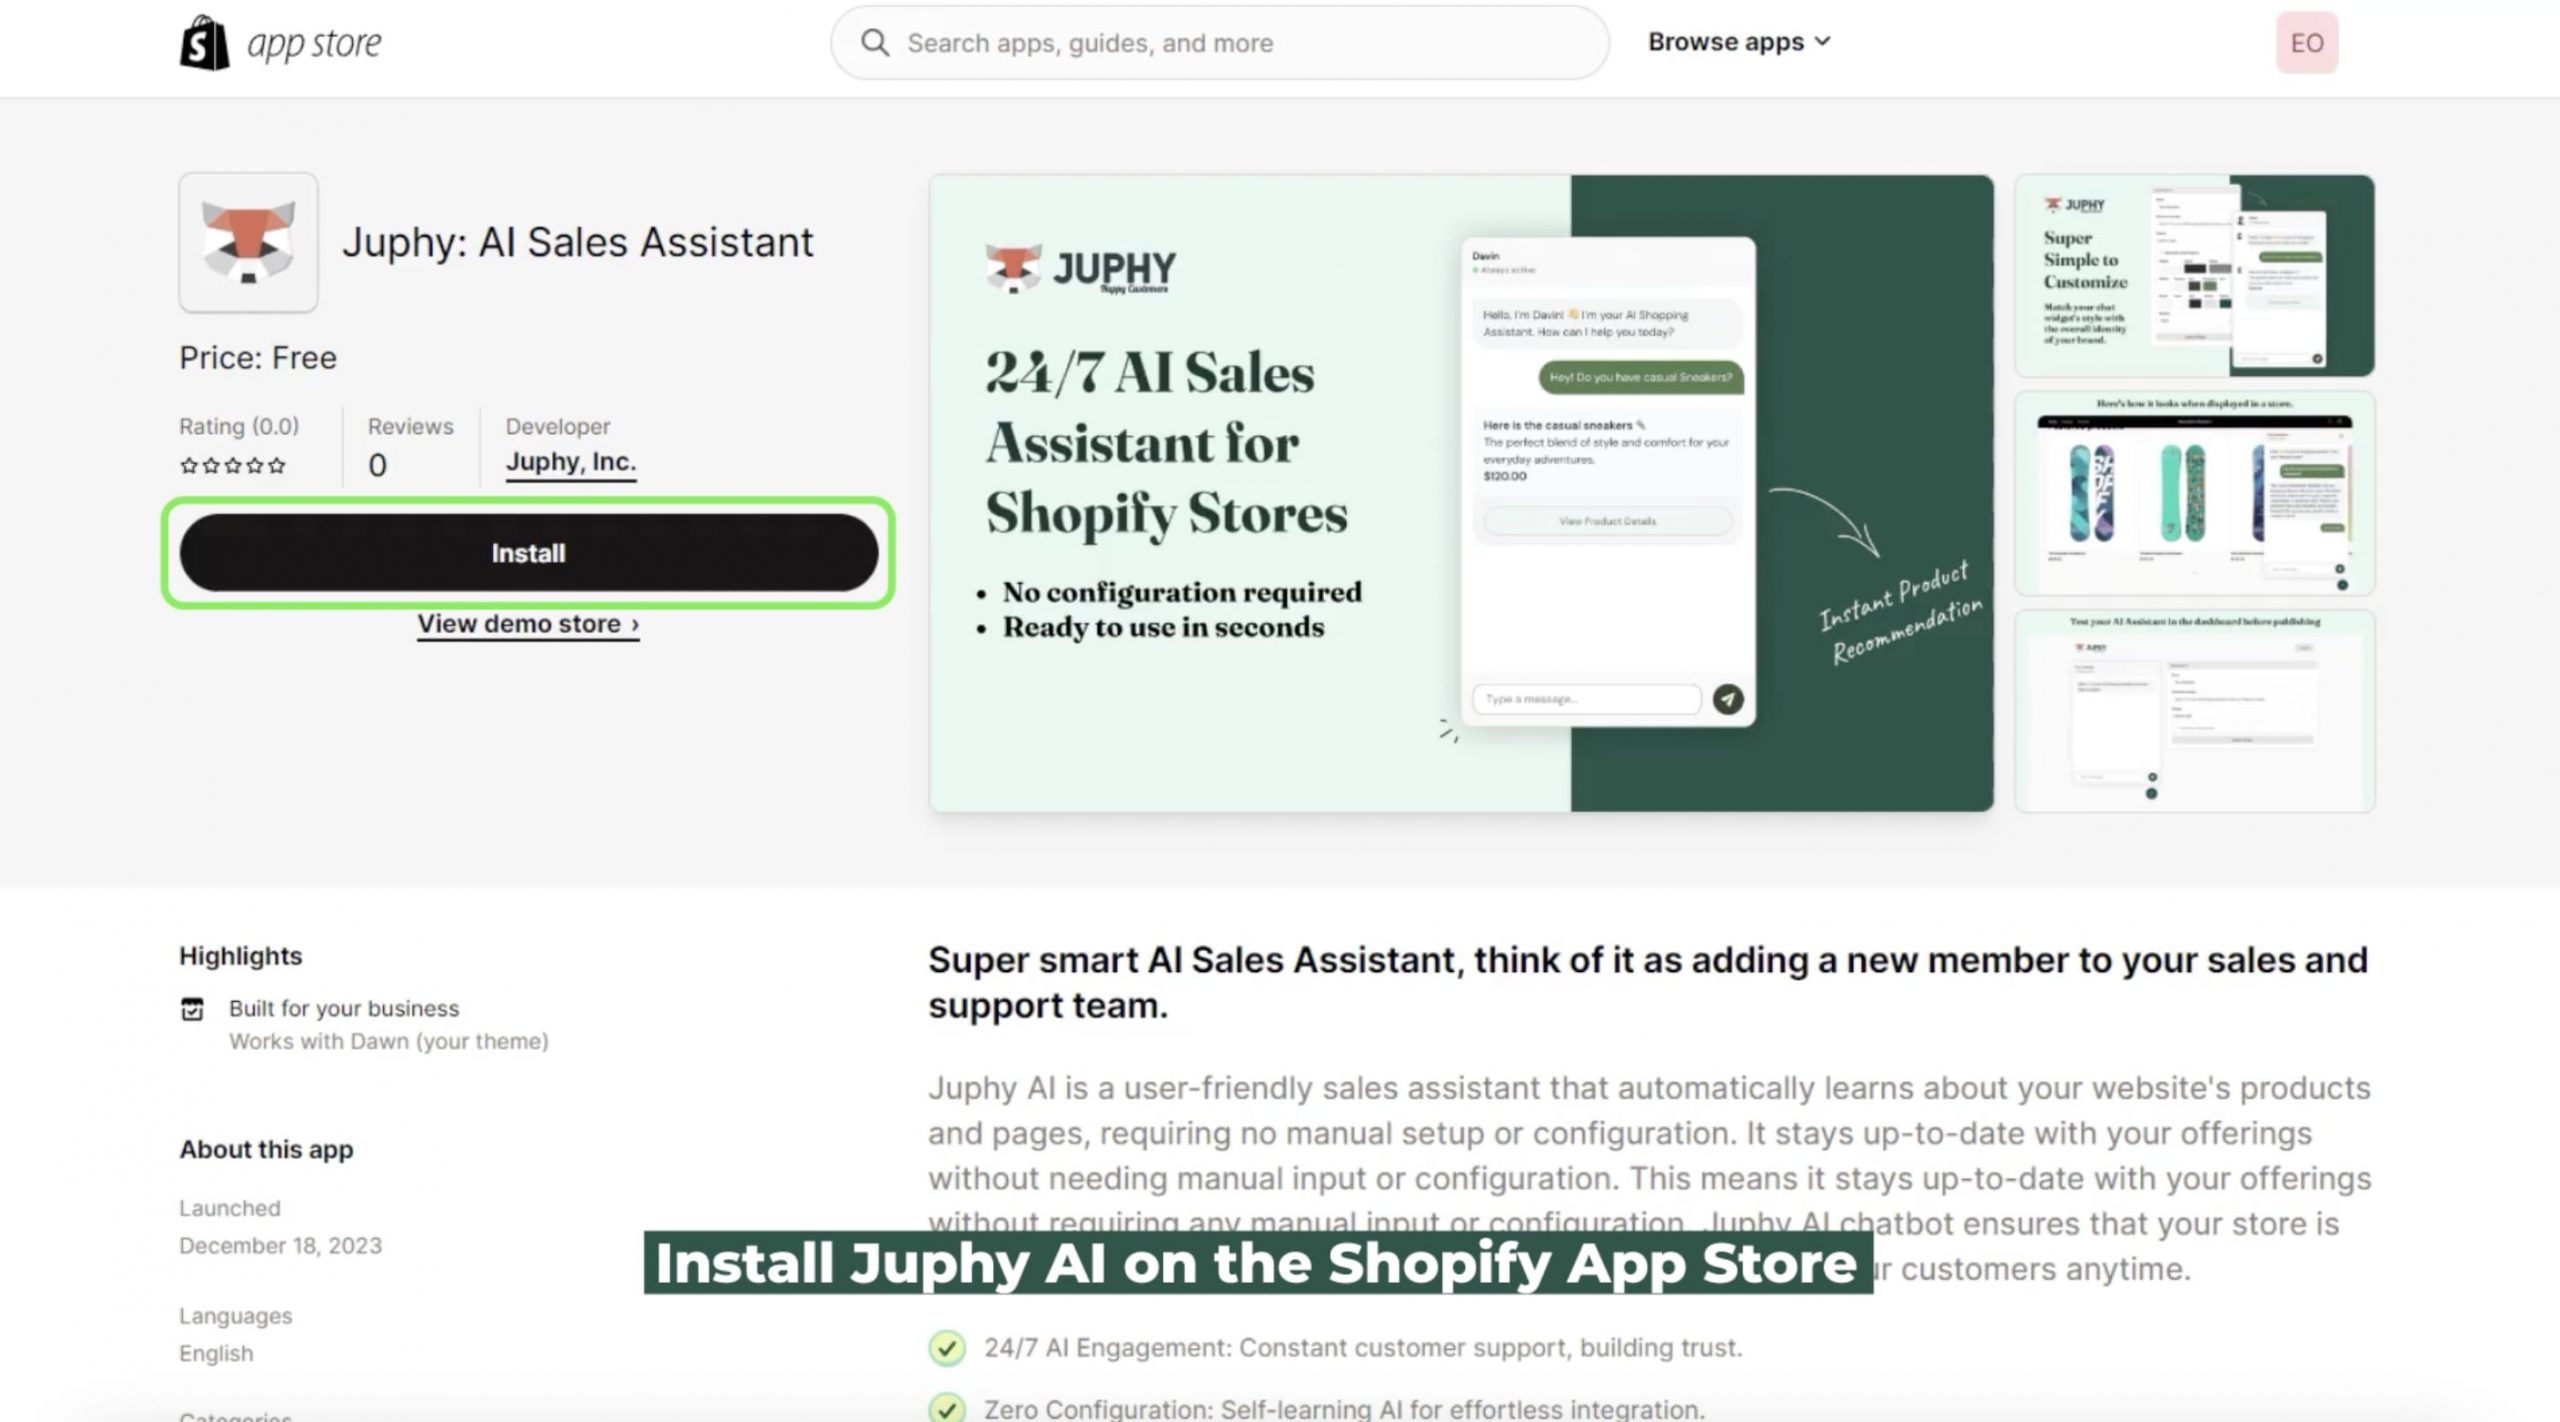 In just two minutes, you can connect your Shopify store to Juphy AI, and test the Shopping Assistant as many times as you like before publishing it on your website.